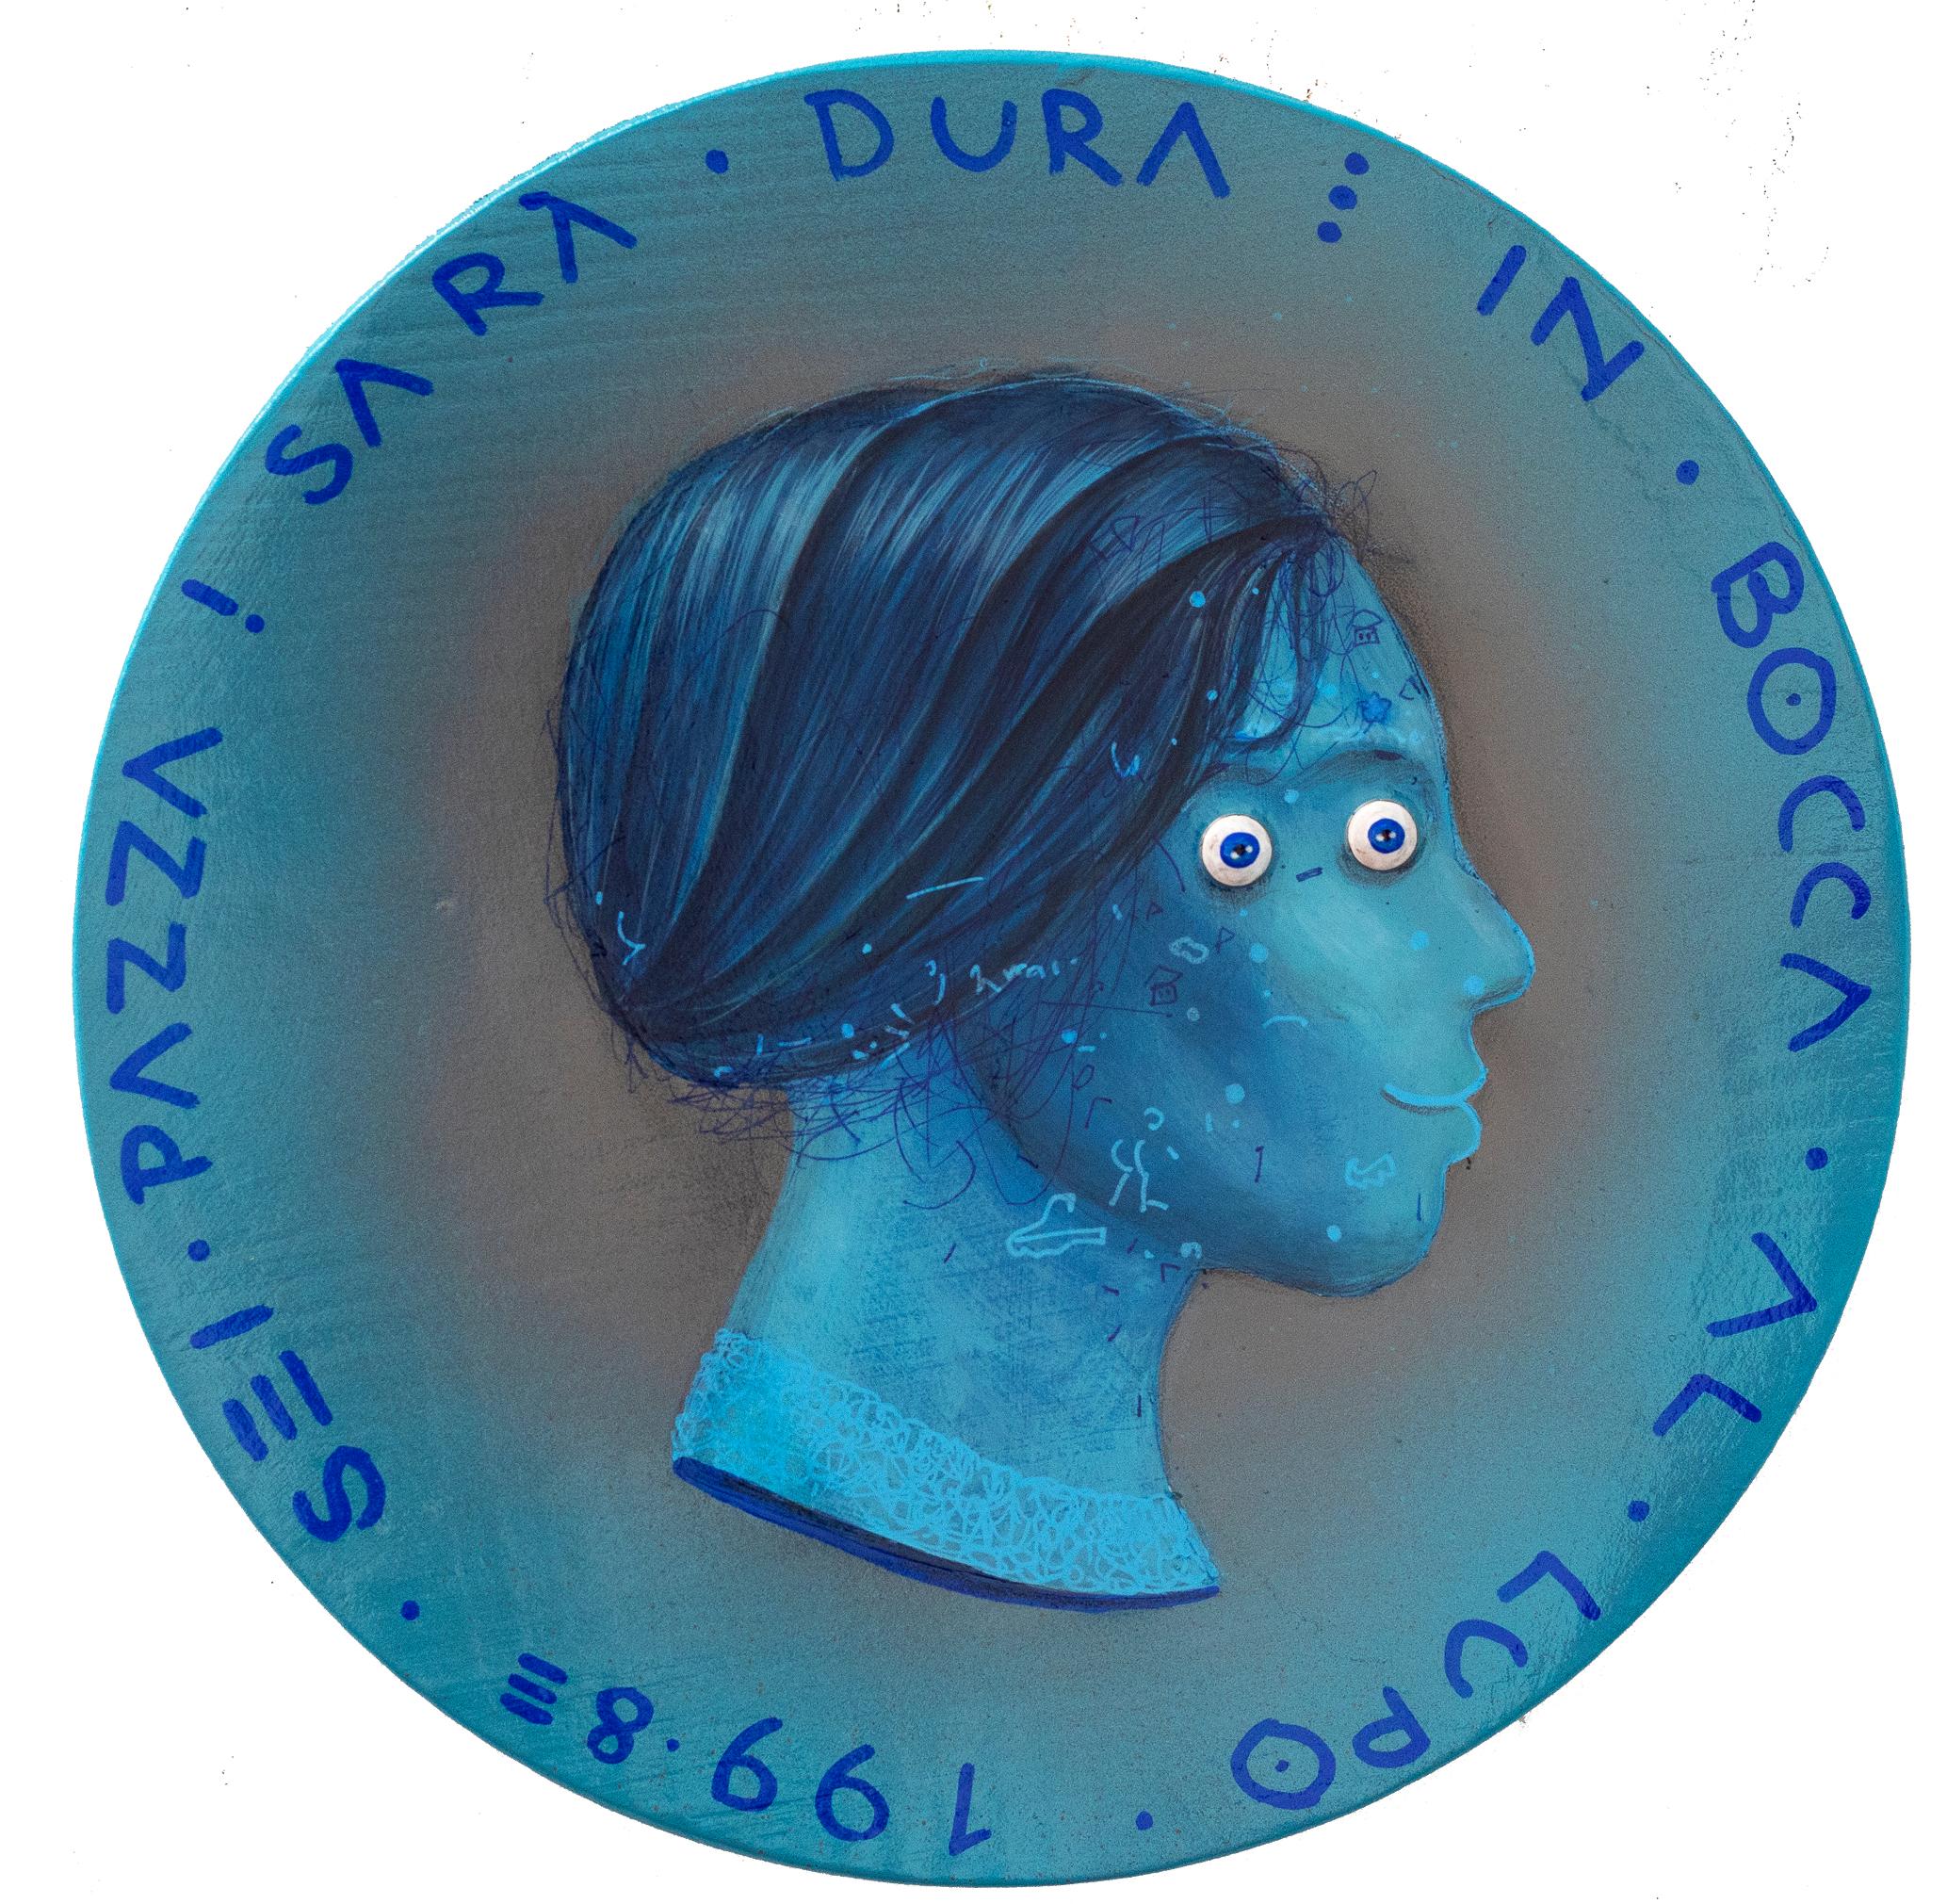 Vibrant Pop Surrealist Crazy Portrait On A Blue Wooden Coin.  "Currency #195"